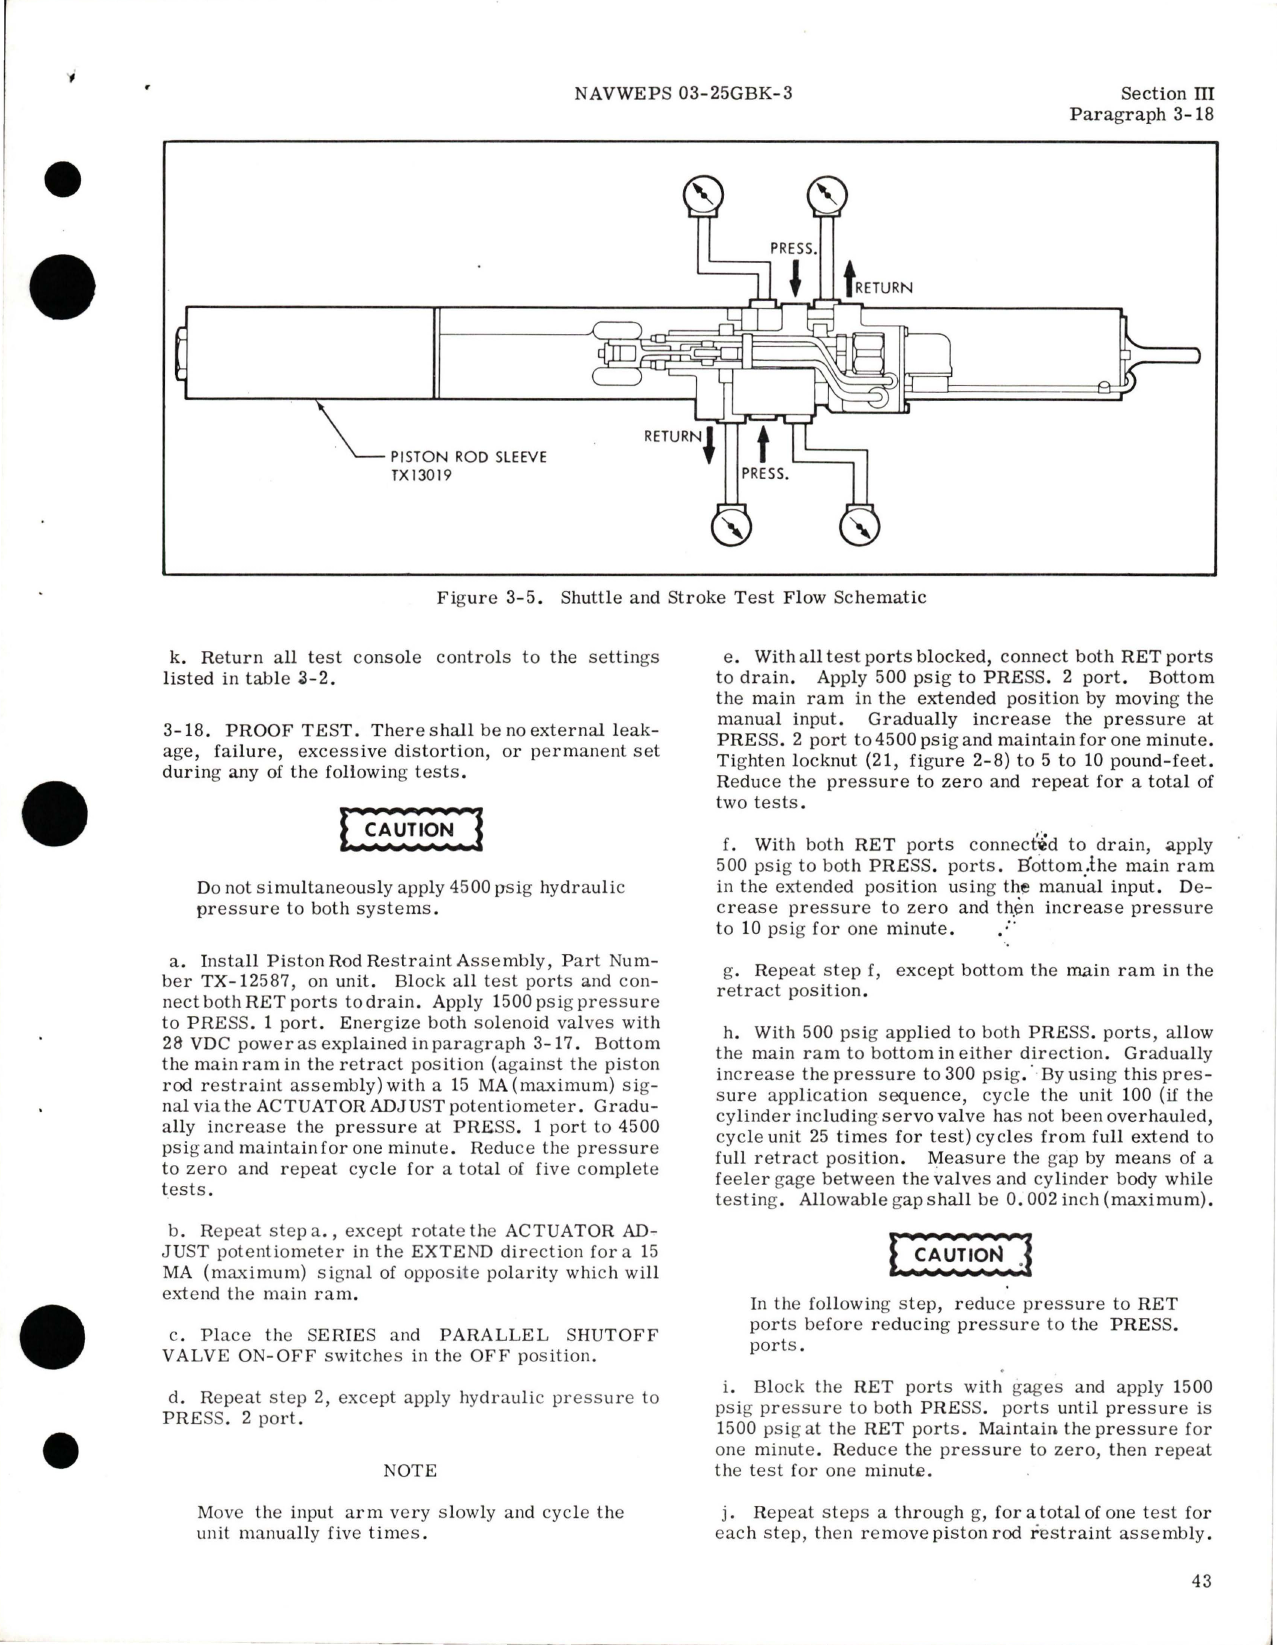 Sample page 5 from AirCorps Library document: Overhaul Instructions for Electro-Hydraulic Tandem Power Control Cylinder - Parts 16150-7, 16150-8, 16150-11, 16150-12, 16150-13, and 16150-14